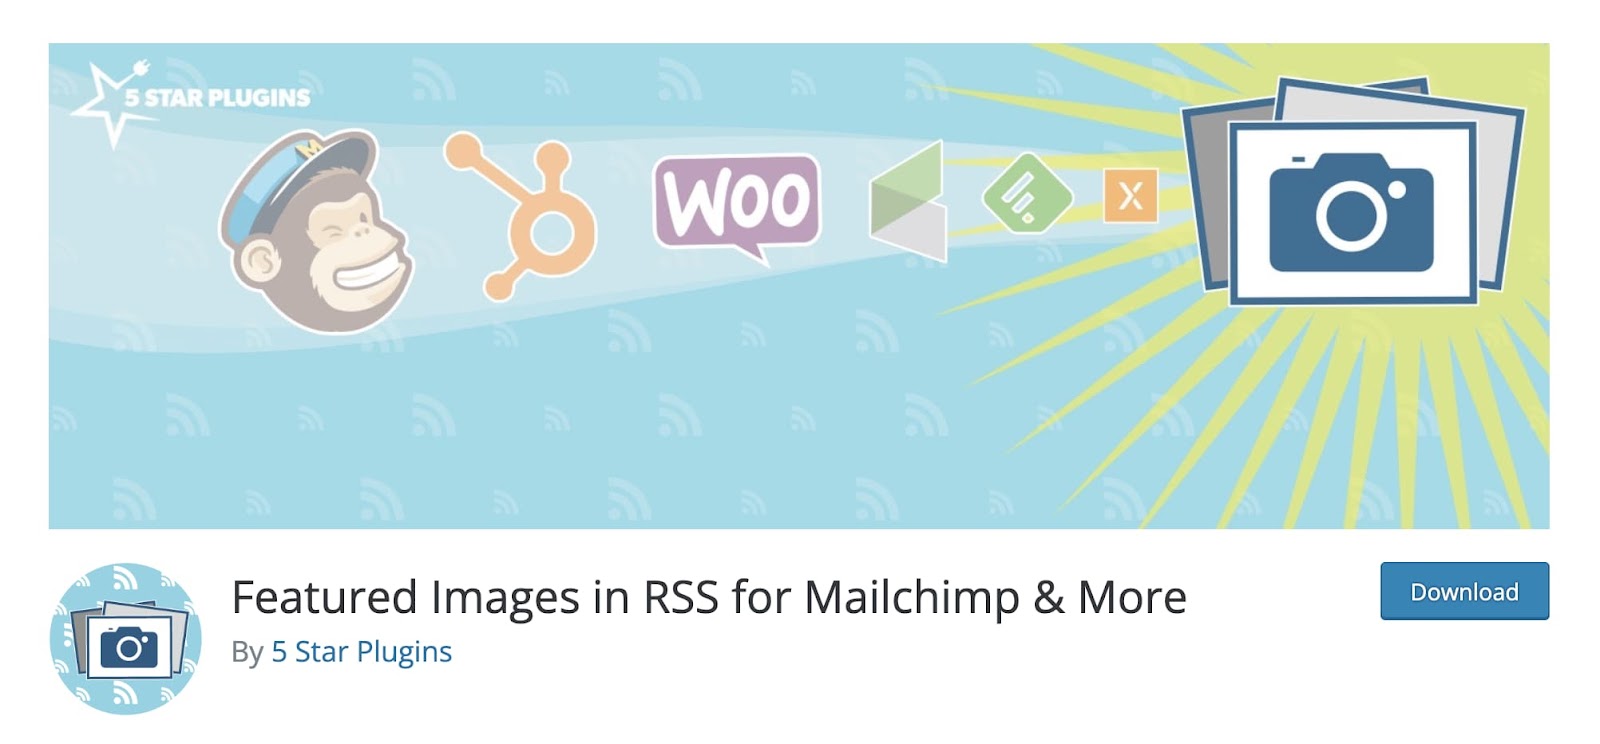 Featured Images in RSS for Mailchimp & More